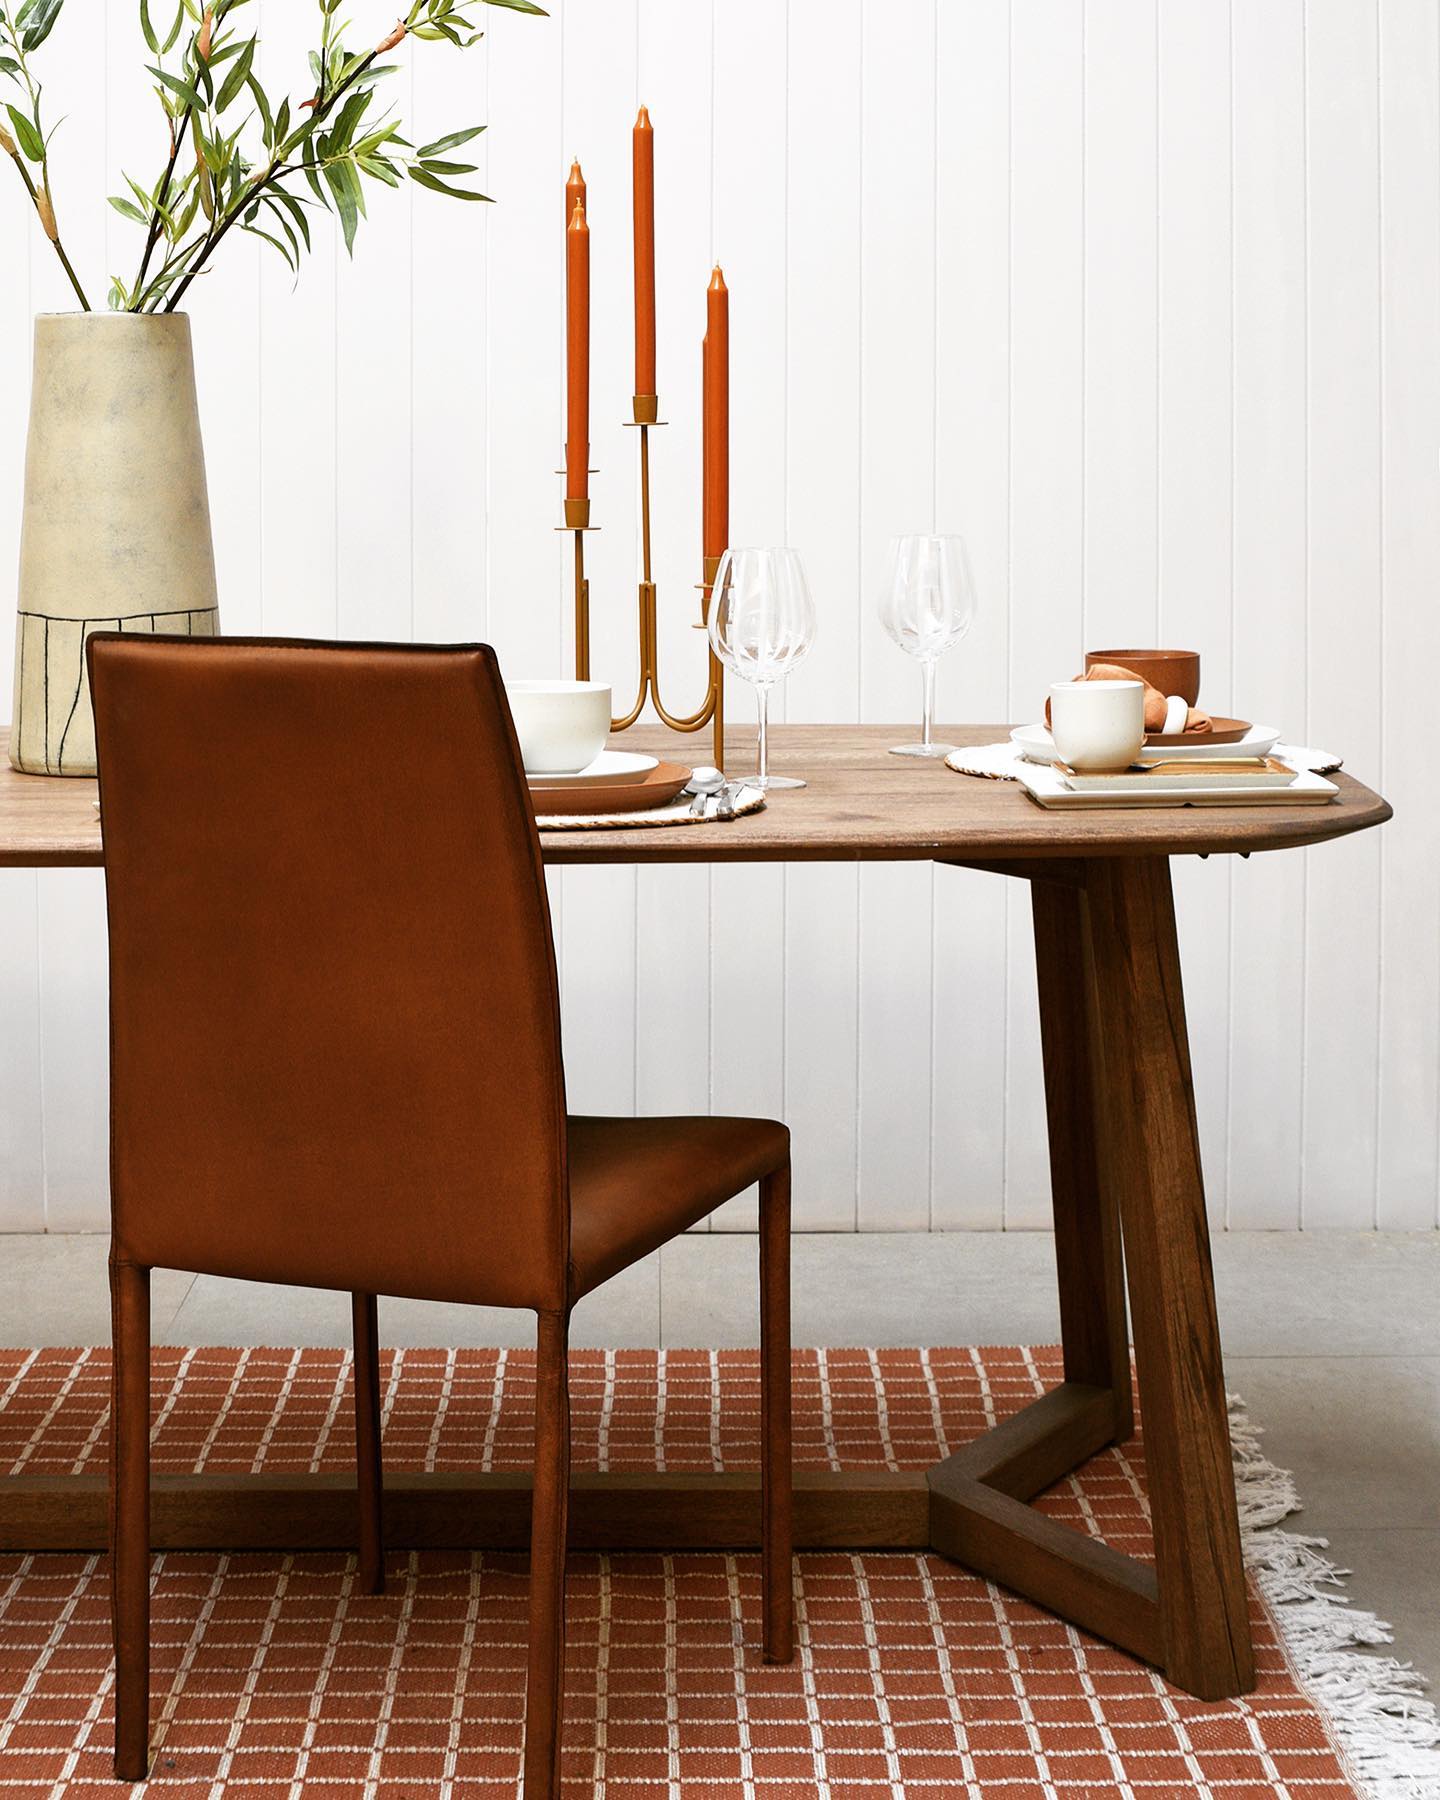 New from Pure Furniture is the PETRINA chair. Crafted in matt brown buffalo leather, the leather extends to cover the legs giving a seamless look.
Paired with the Pure HAWAII dining table, milled from 200 year old Romanian reclaimed oak, showing the beautiful grooves and grains of the timber. 
.
.
#dining #diningchair #diningtable #buffaloleather #oak #dininginstyle